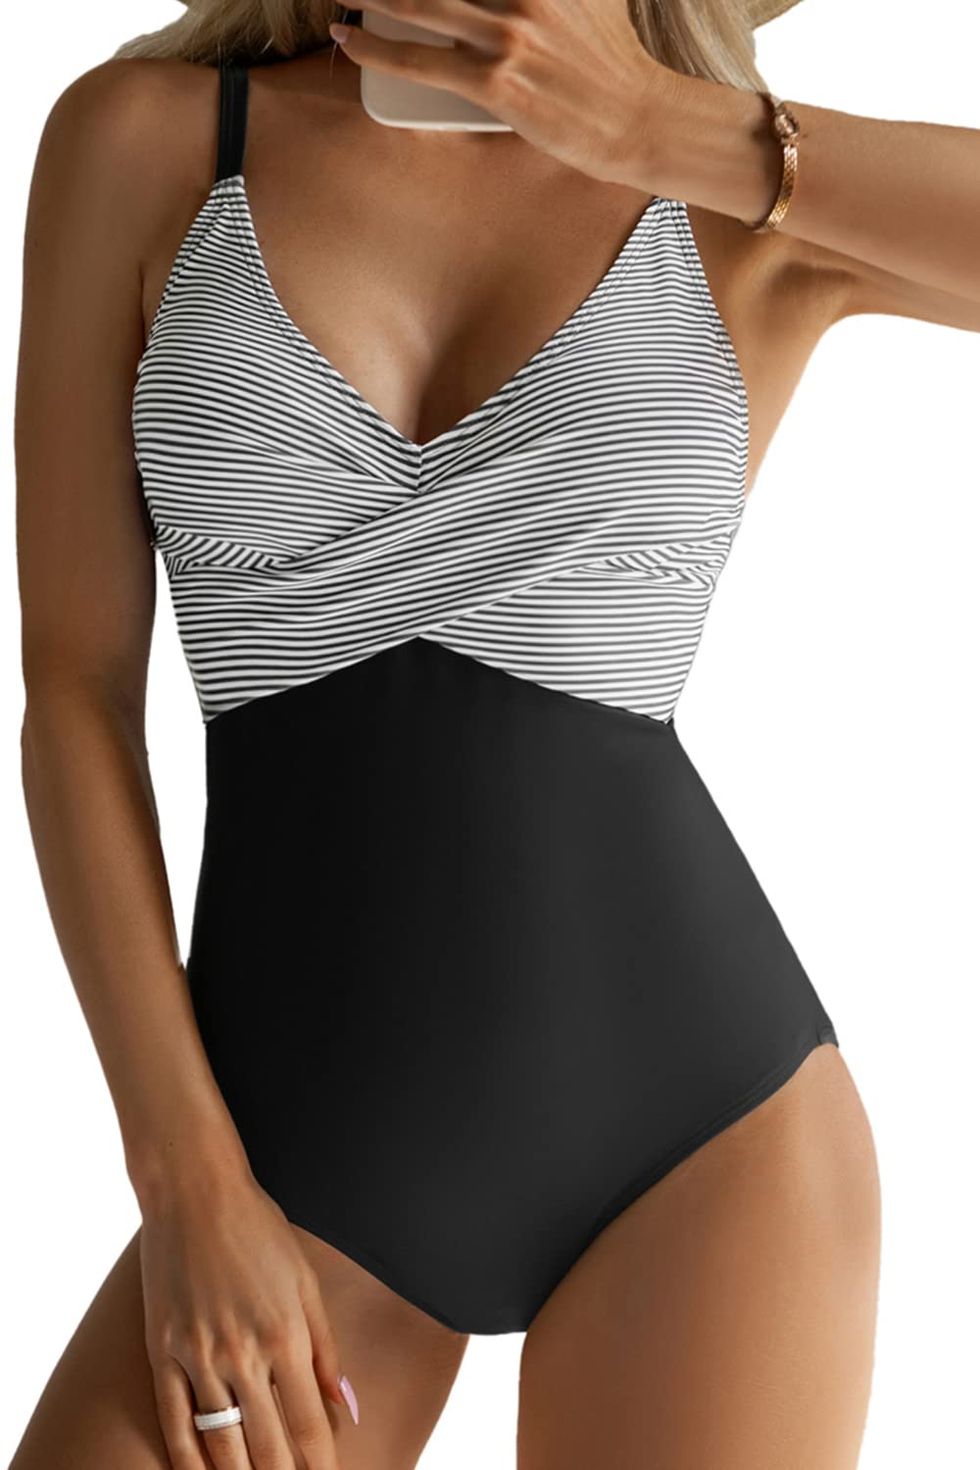 CUPSHE Women's Tie Front One Piece Swimsuit High Neck Design with